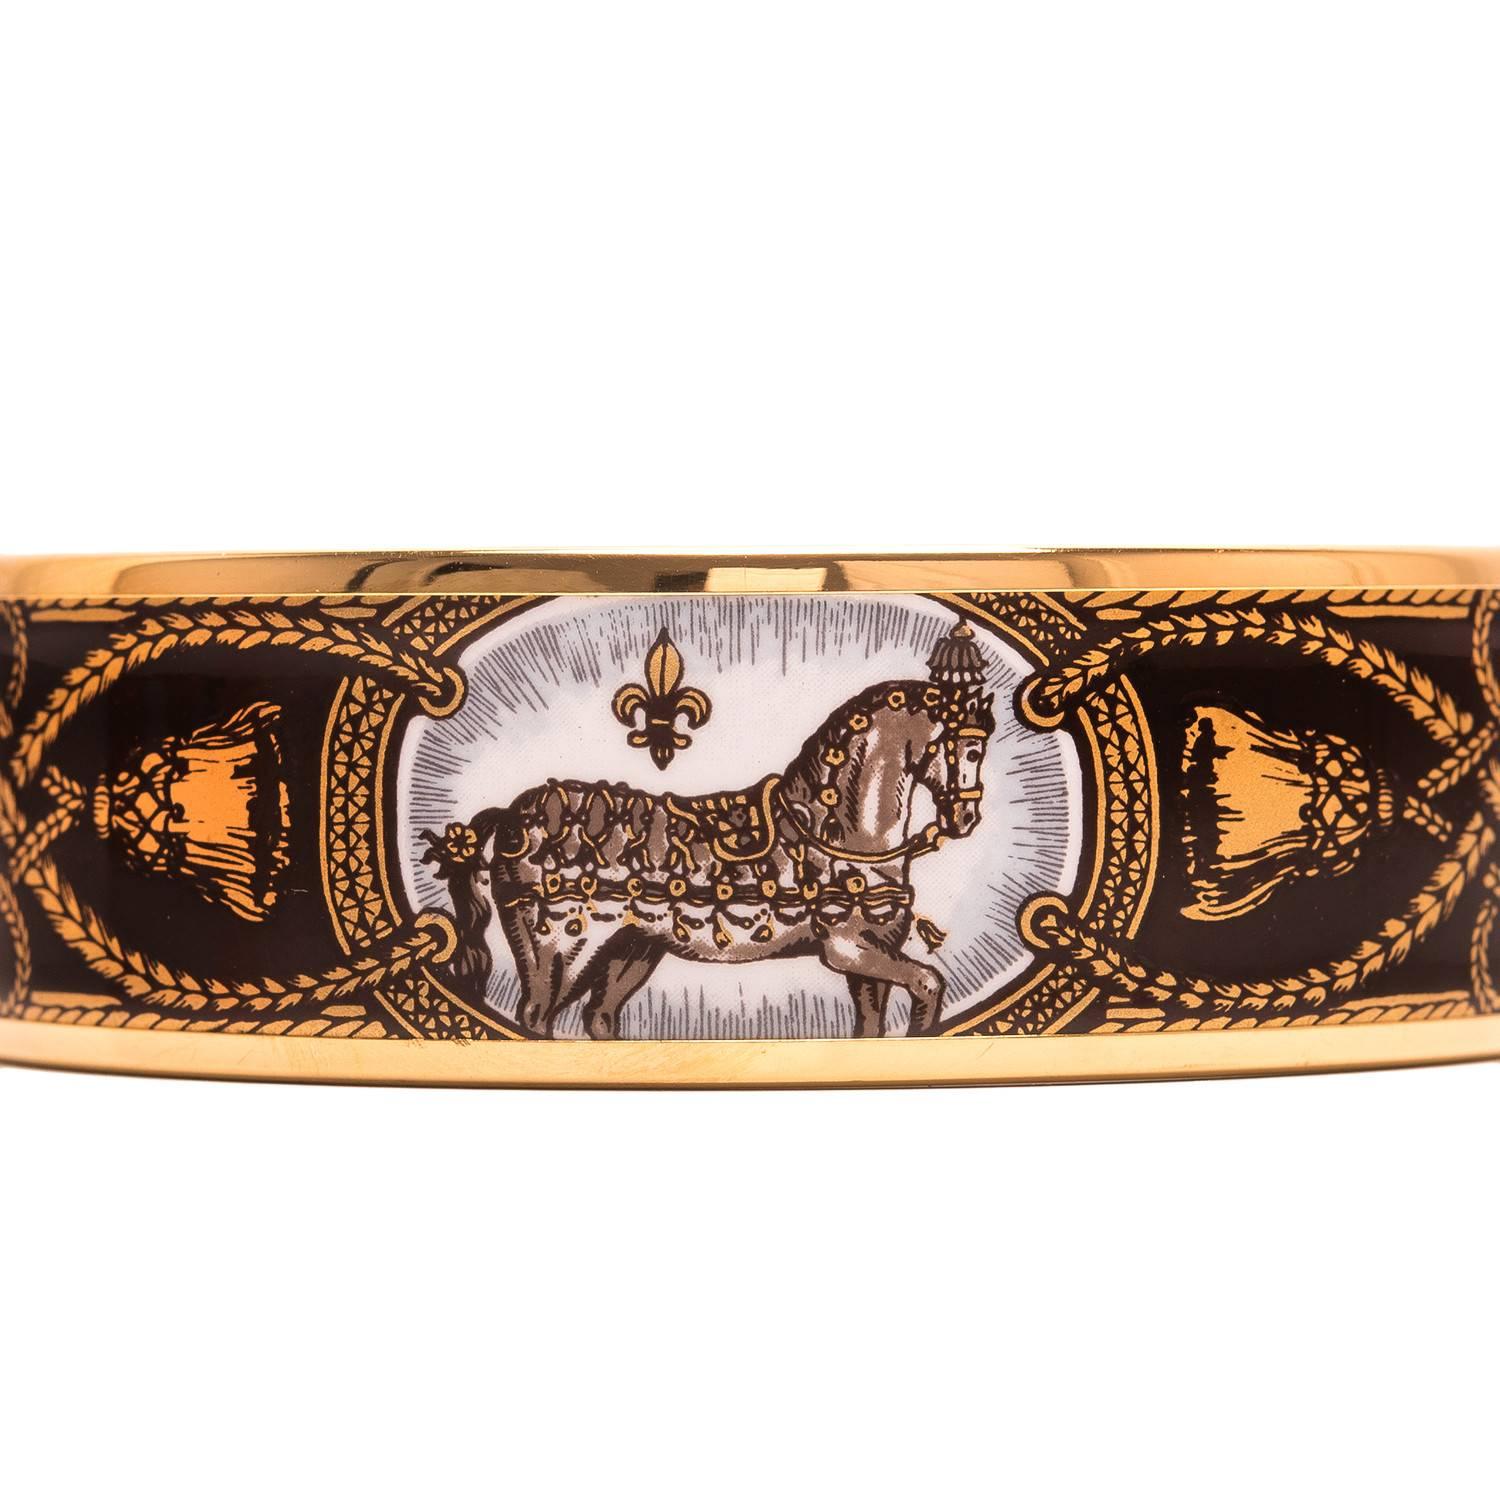 Hermes "Grand Apparat" wide printed enamel bracelet in size GM (70).

This bracelet depicts horses in royal costume on a purple colored background with gold plated hardware.

Origin: Austria

Condition: Excellent

Accompanied by: